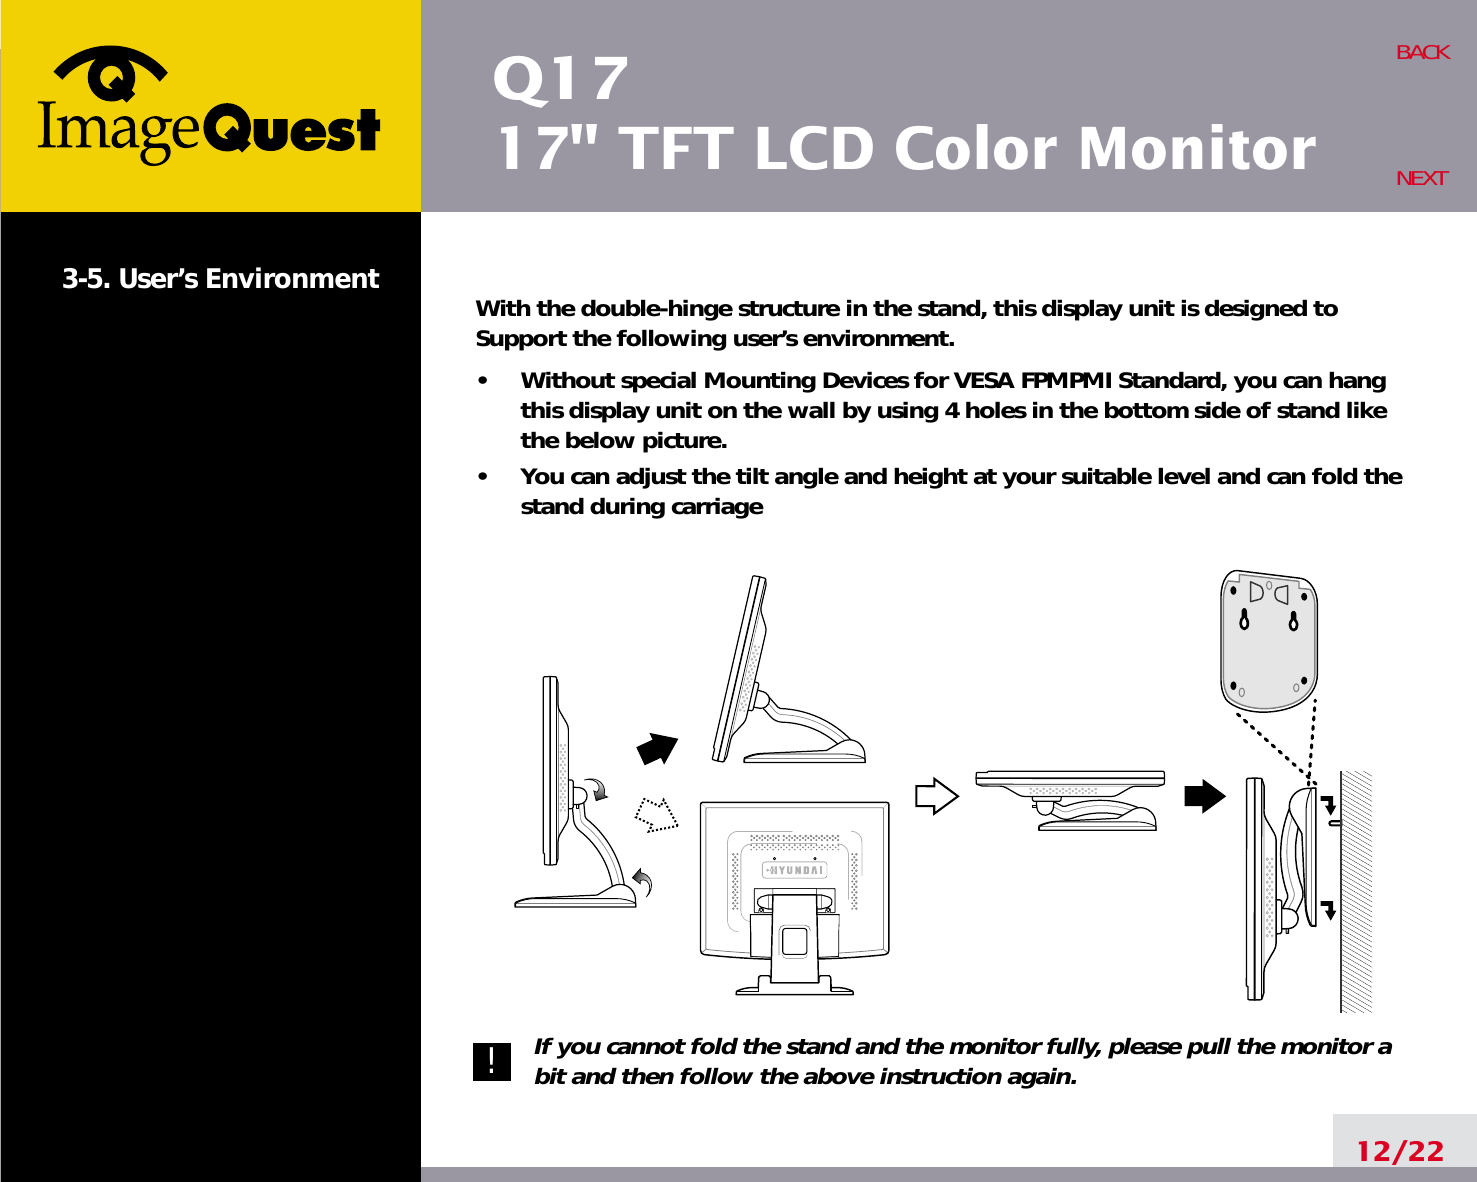 Q1717&quot; TFT LCD Color Monitor3-5. User’s Environment With the double-hinge structure in the stand, this display unit is designed toSupport the following user’s environment.•     Without special Mounting Devices for VESA FPMPMI Standard, you can hangthis display unit on the wall by using 4 holes in the bottom side of stand likethe below picture.•     You can adjust the tilt angle and height at your suitable level and can fold thestand during carriageIf you cannot fold the stand and the monitor fully, please pull the monitor abit and then follow the above instruction again.12/22BACKNEXT!!